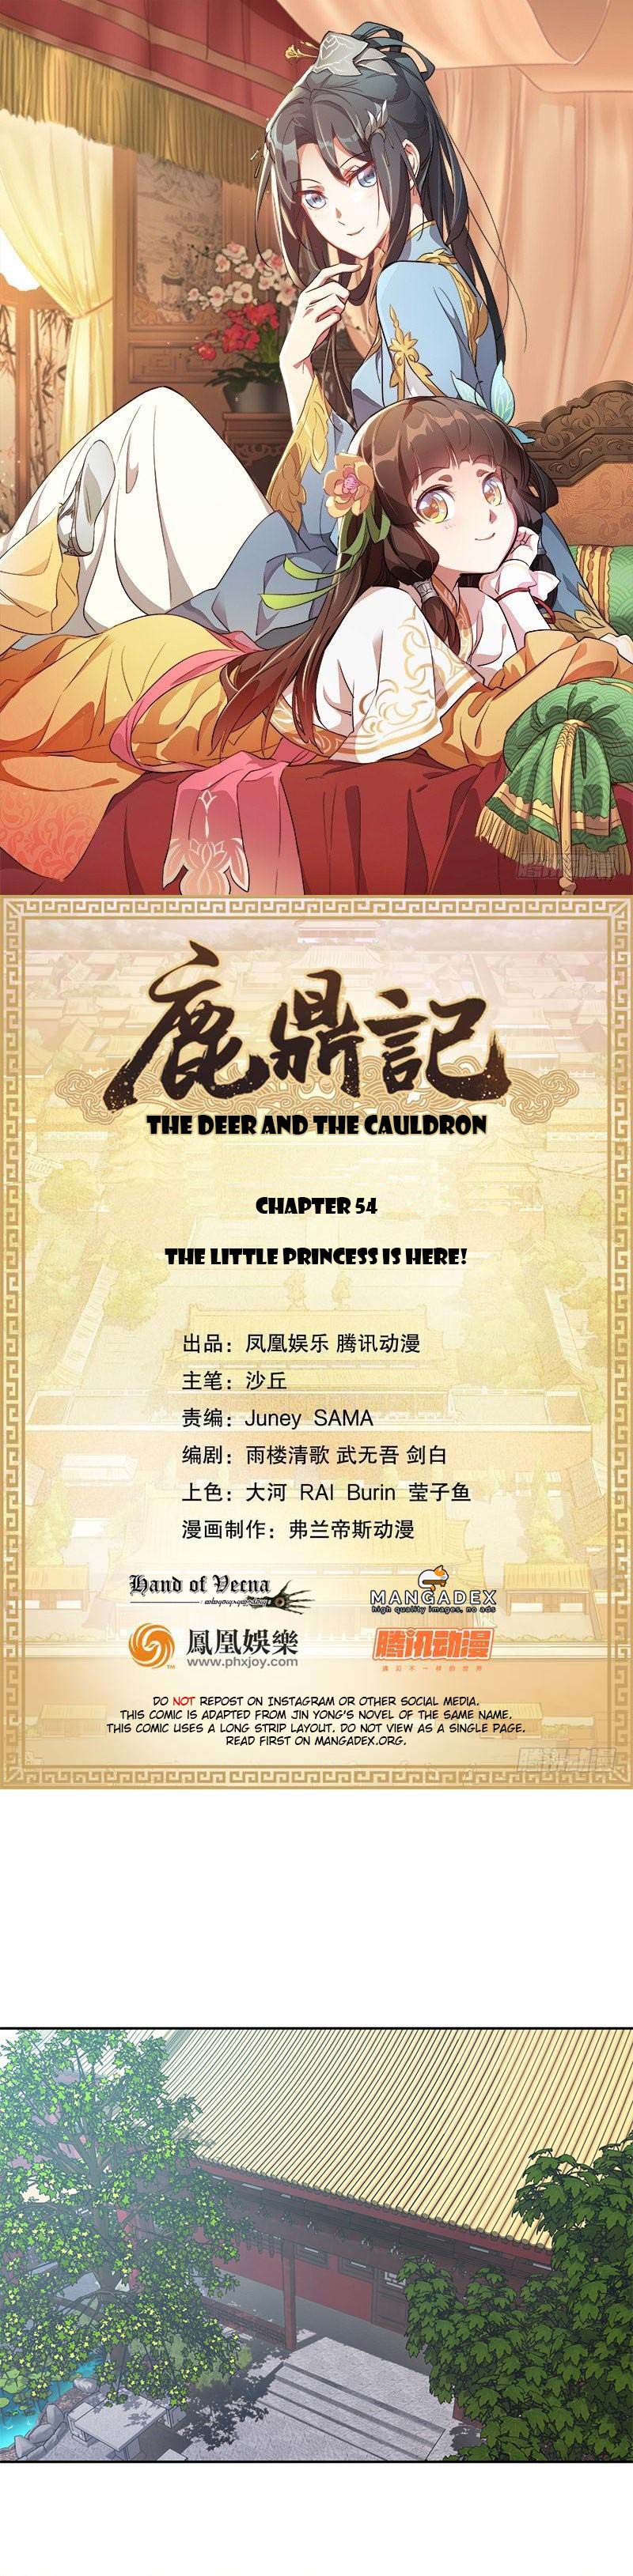 The Deer And The Cauldron Chapter 54 #1